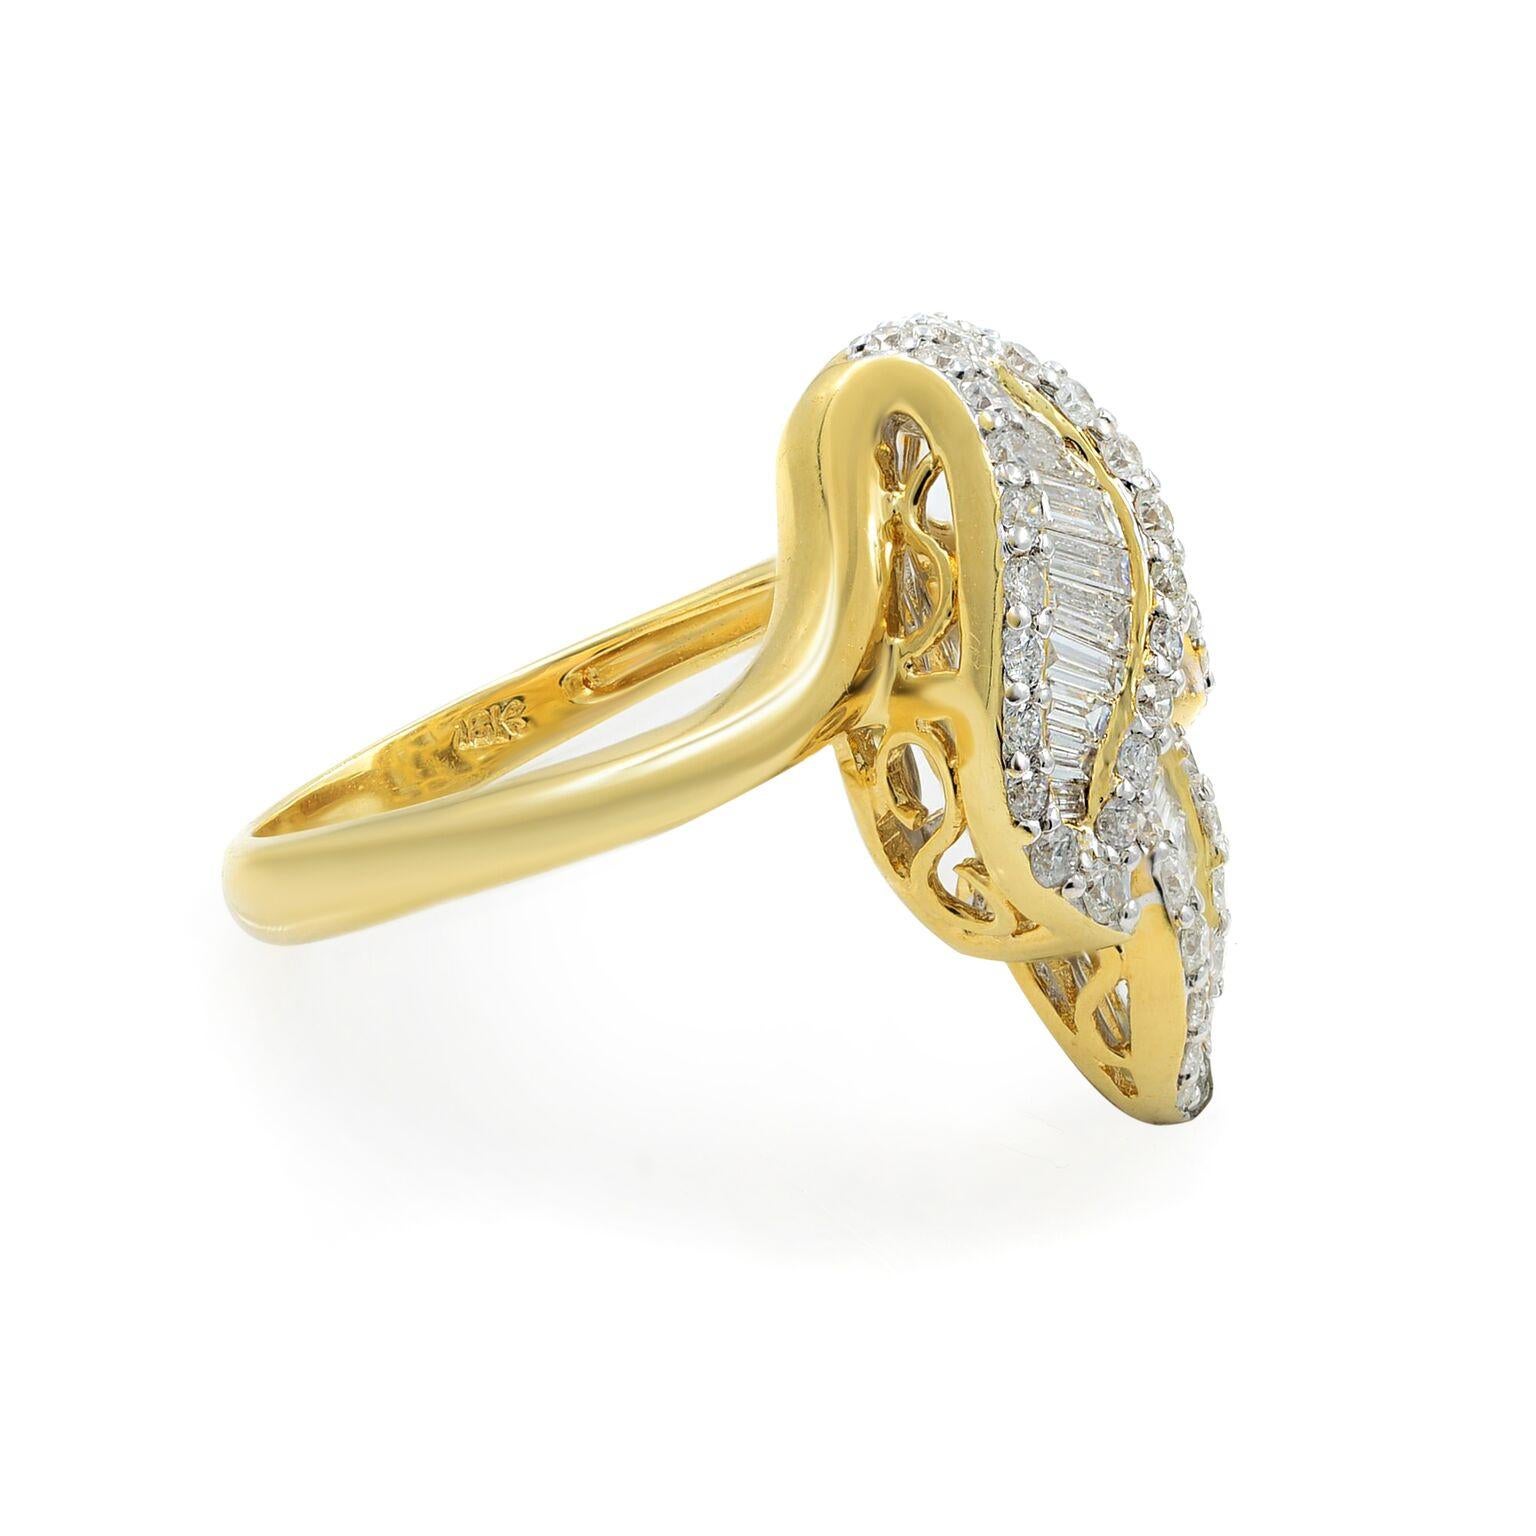 Rachel Koen Round and Baguette Cut Diamond Ring 18K Yellow Gold 1.86Cttw In New Condition For Sale In New York, NY